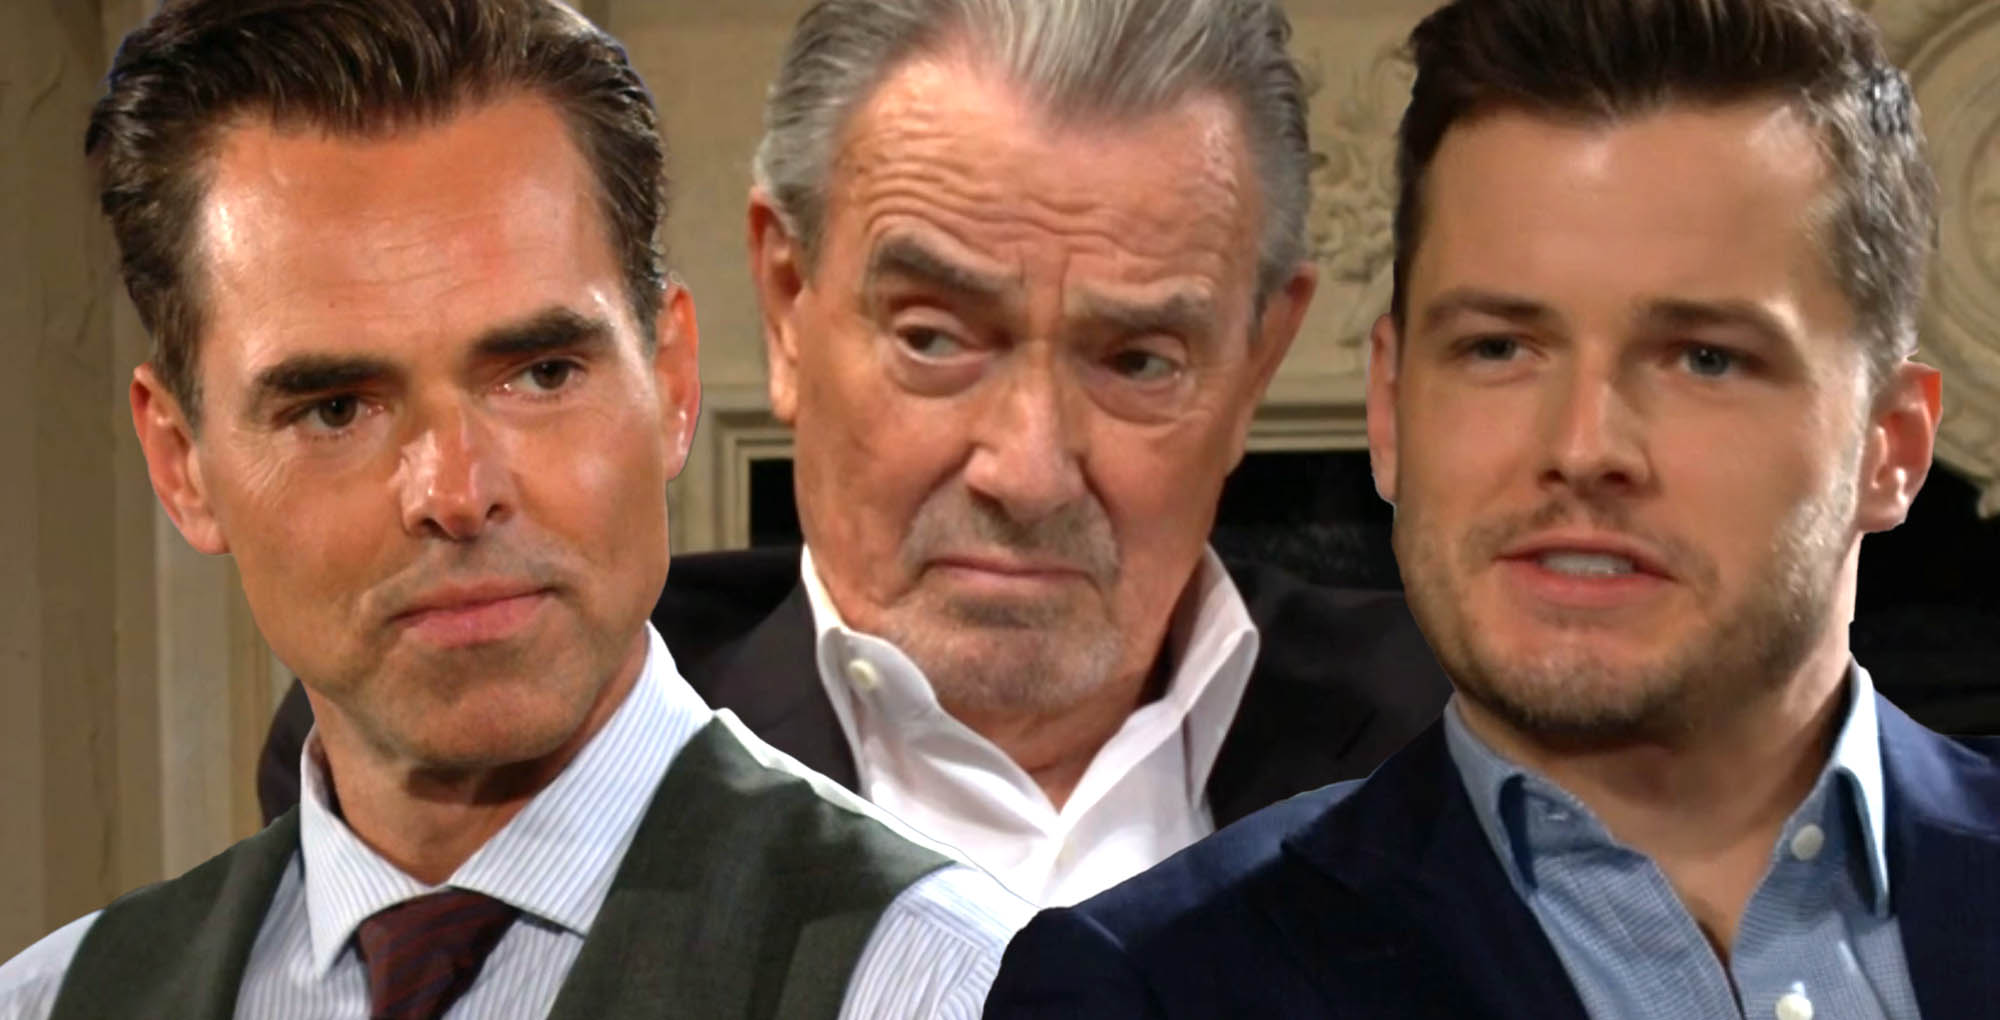 billy, victor, kyle on the young and the restless.